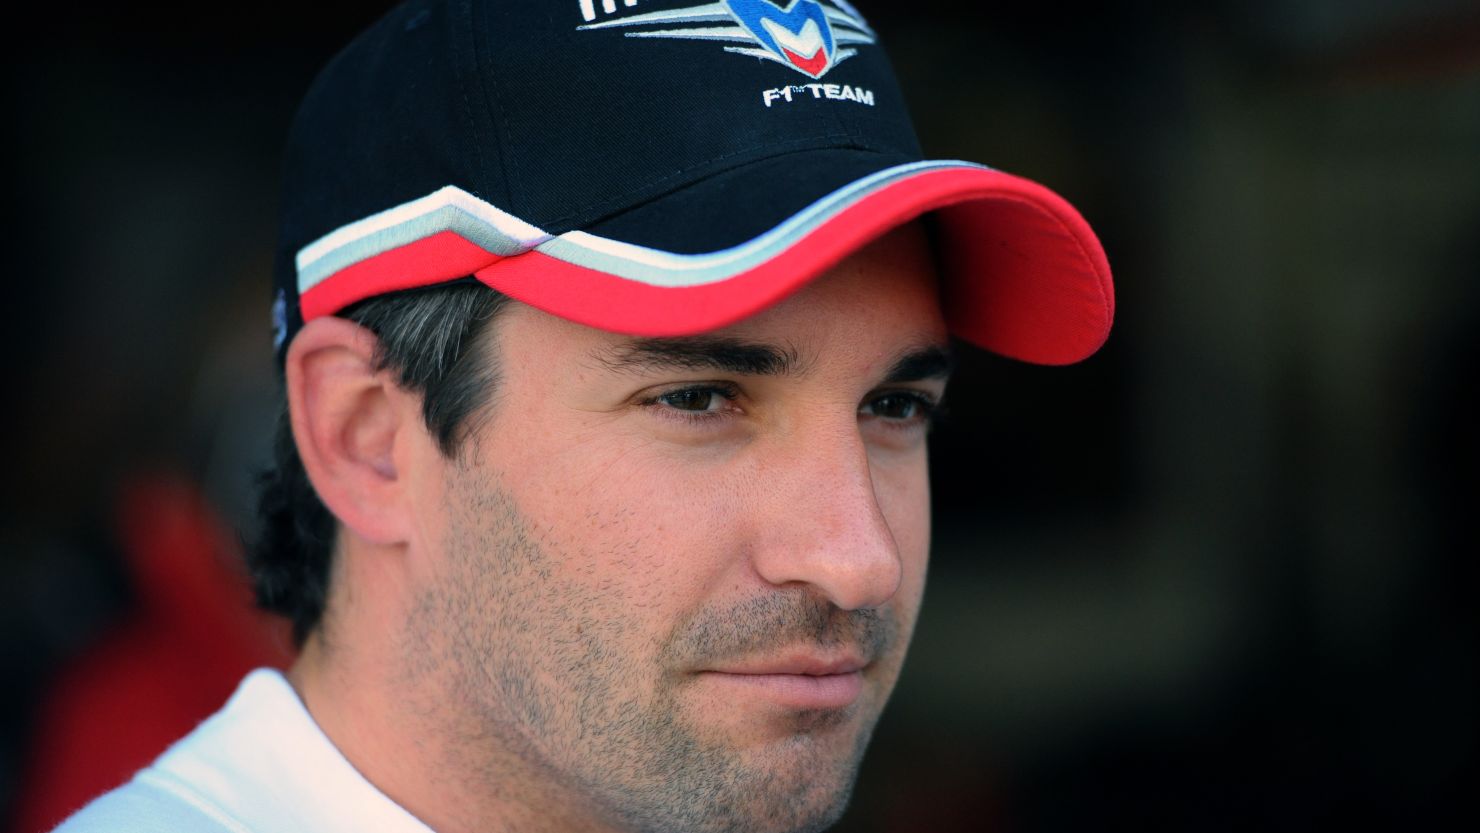 Timo Glock has left Marussia by mutual consent following three years with the team.